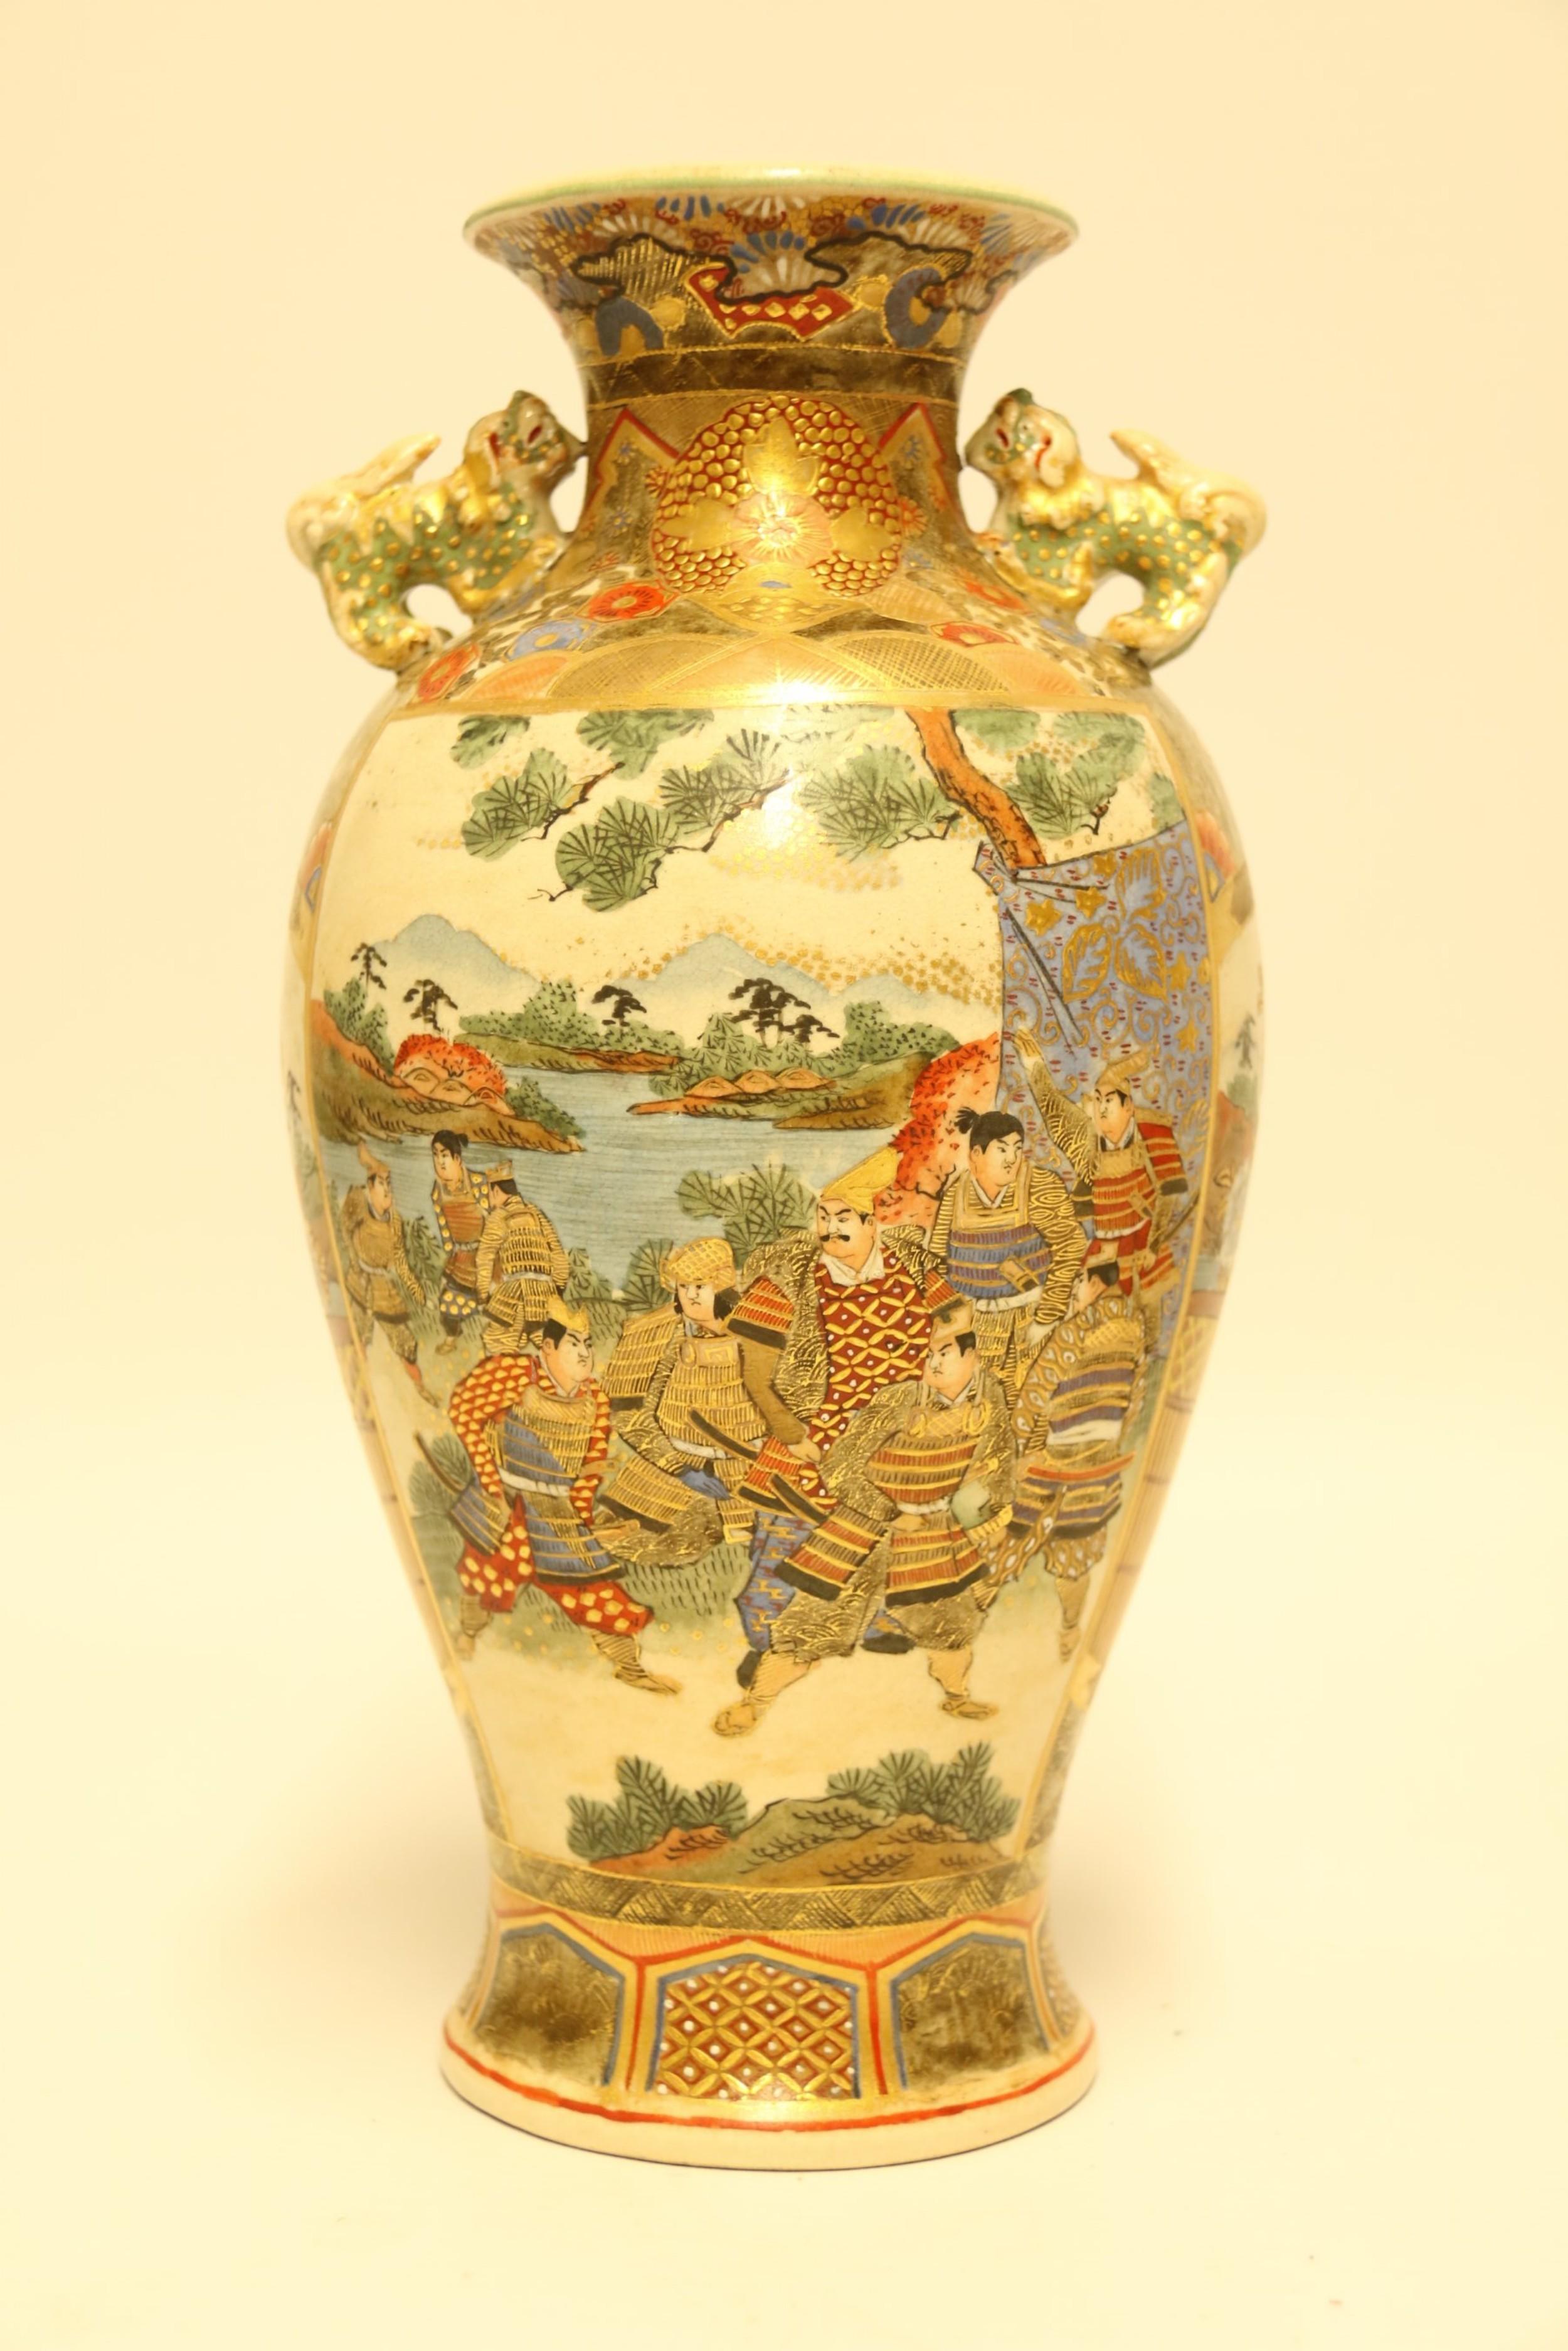 A decorative pair of Satsuma vases made in Japan, circa 1910. 
The vases are decorated with geometric panels in rich raised gilt work, enamel and floral designs with central panels front and back depicting figures in traditional costume of the